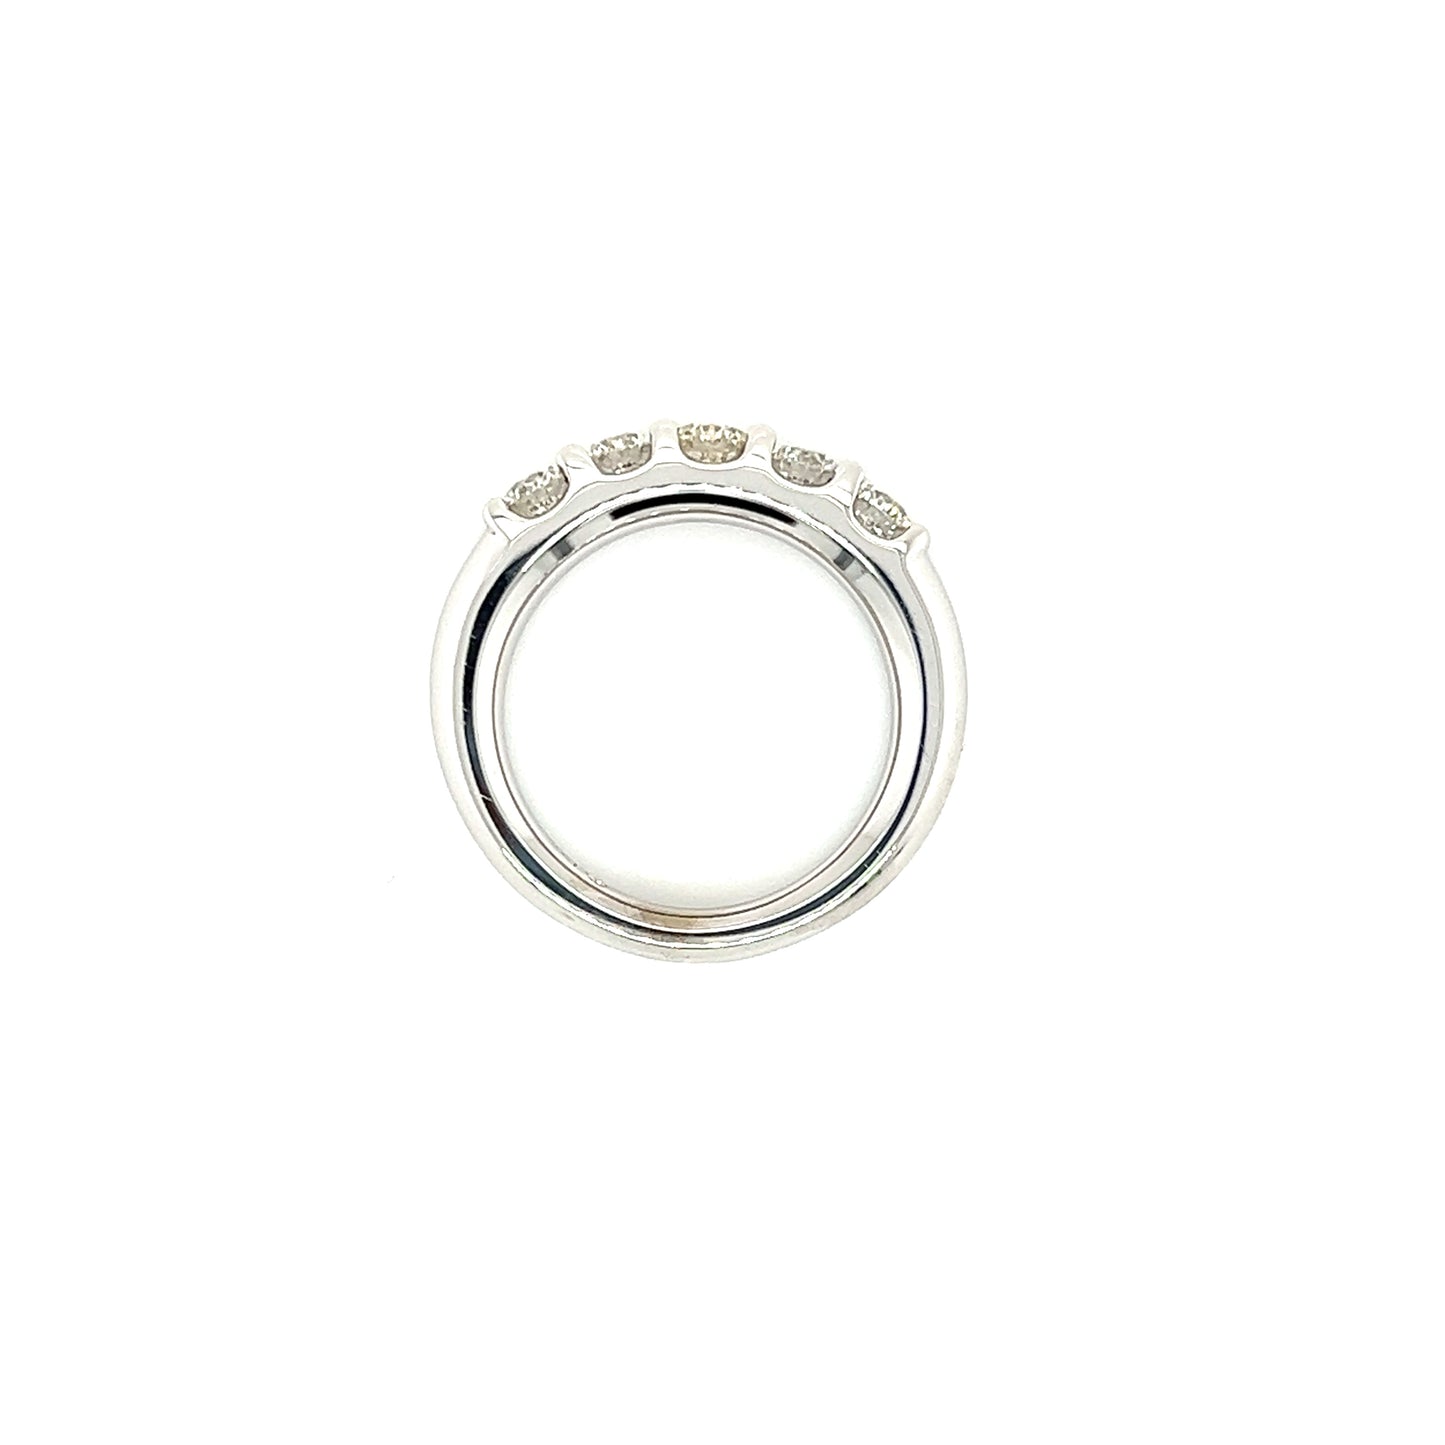 Diamond Ring 4mm with 1.24ctw of Diamonds in 14K White Gold Top View